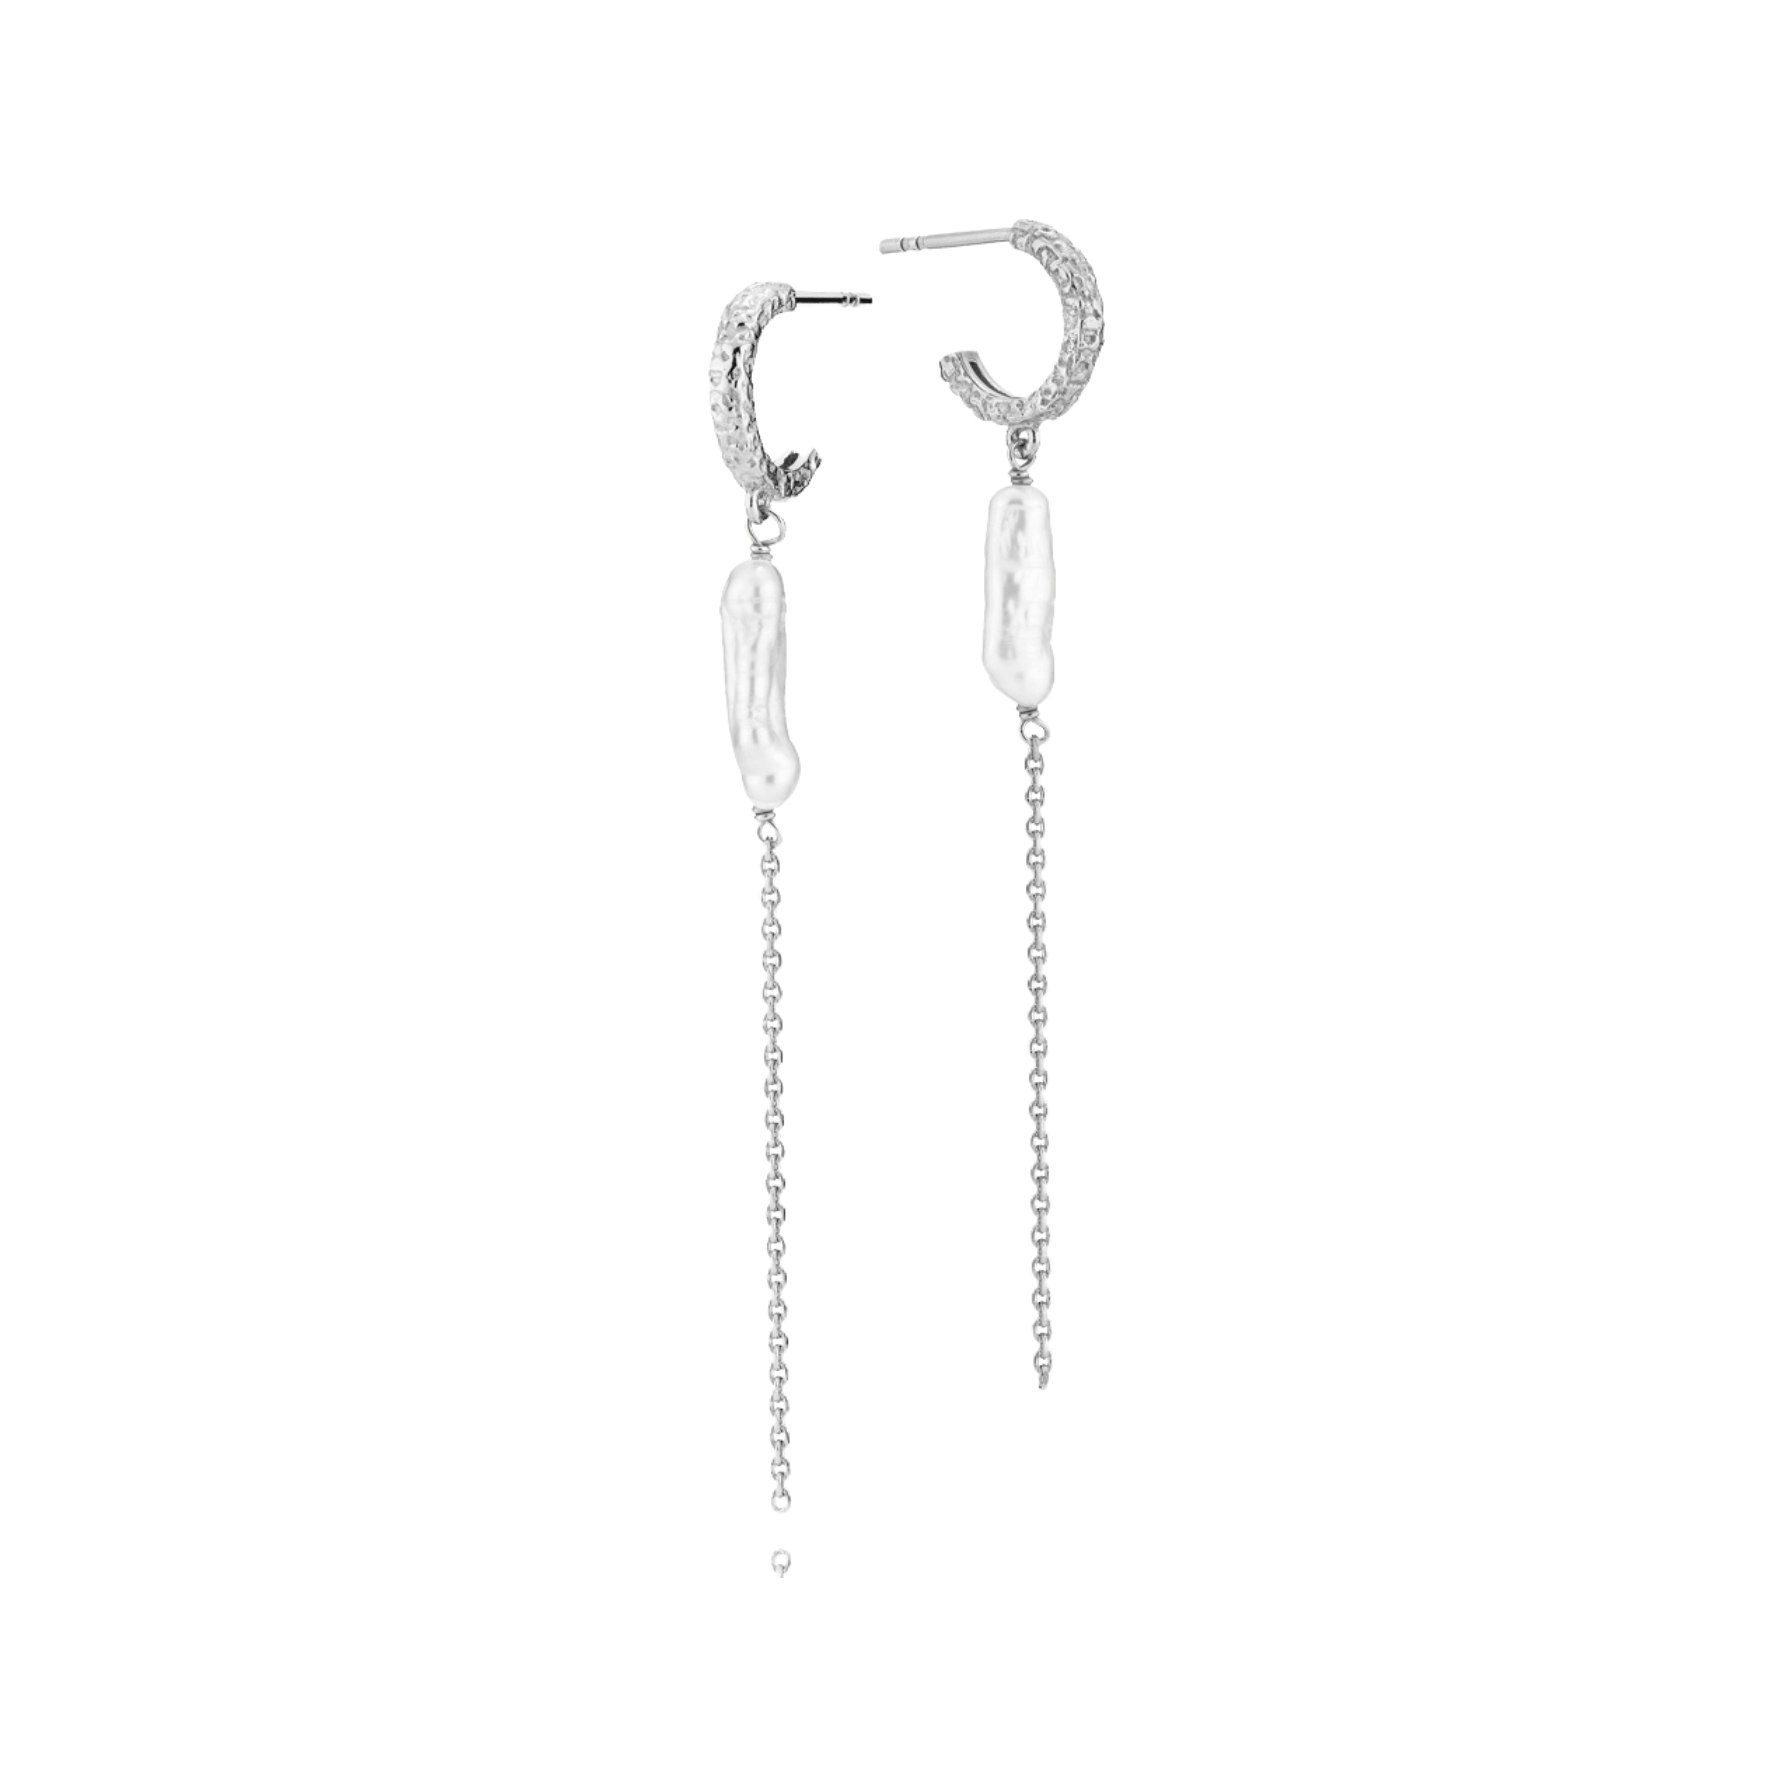 Beach Earchains from Sistie in Silver Sterling 925